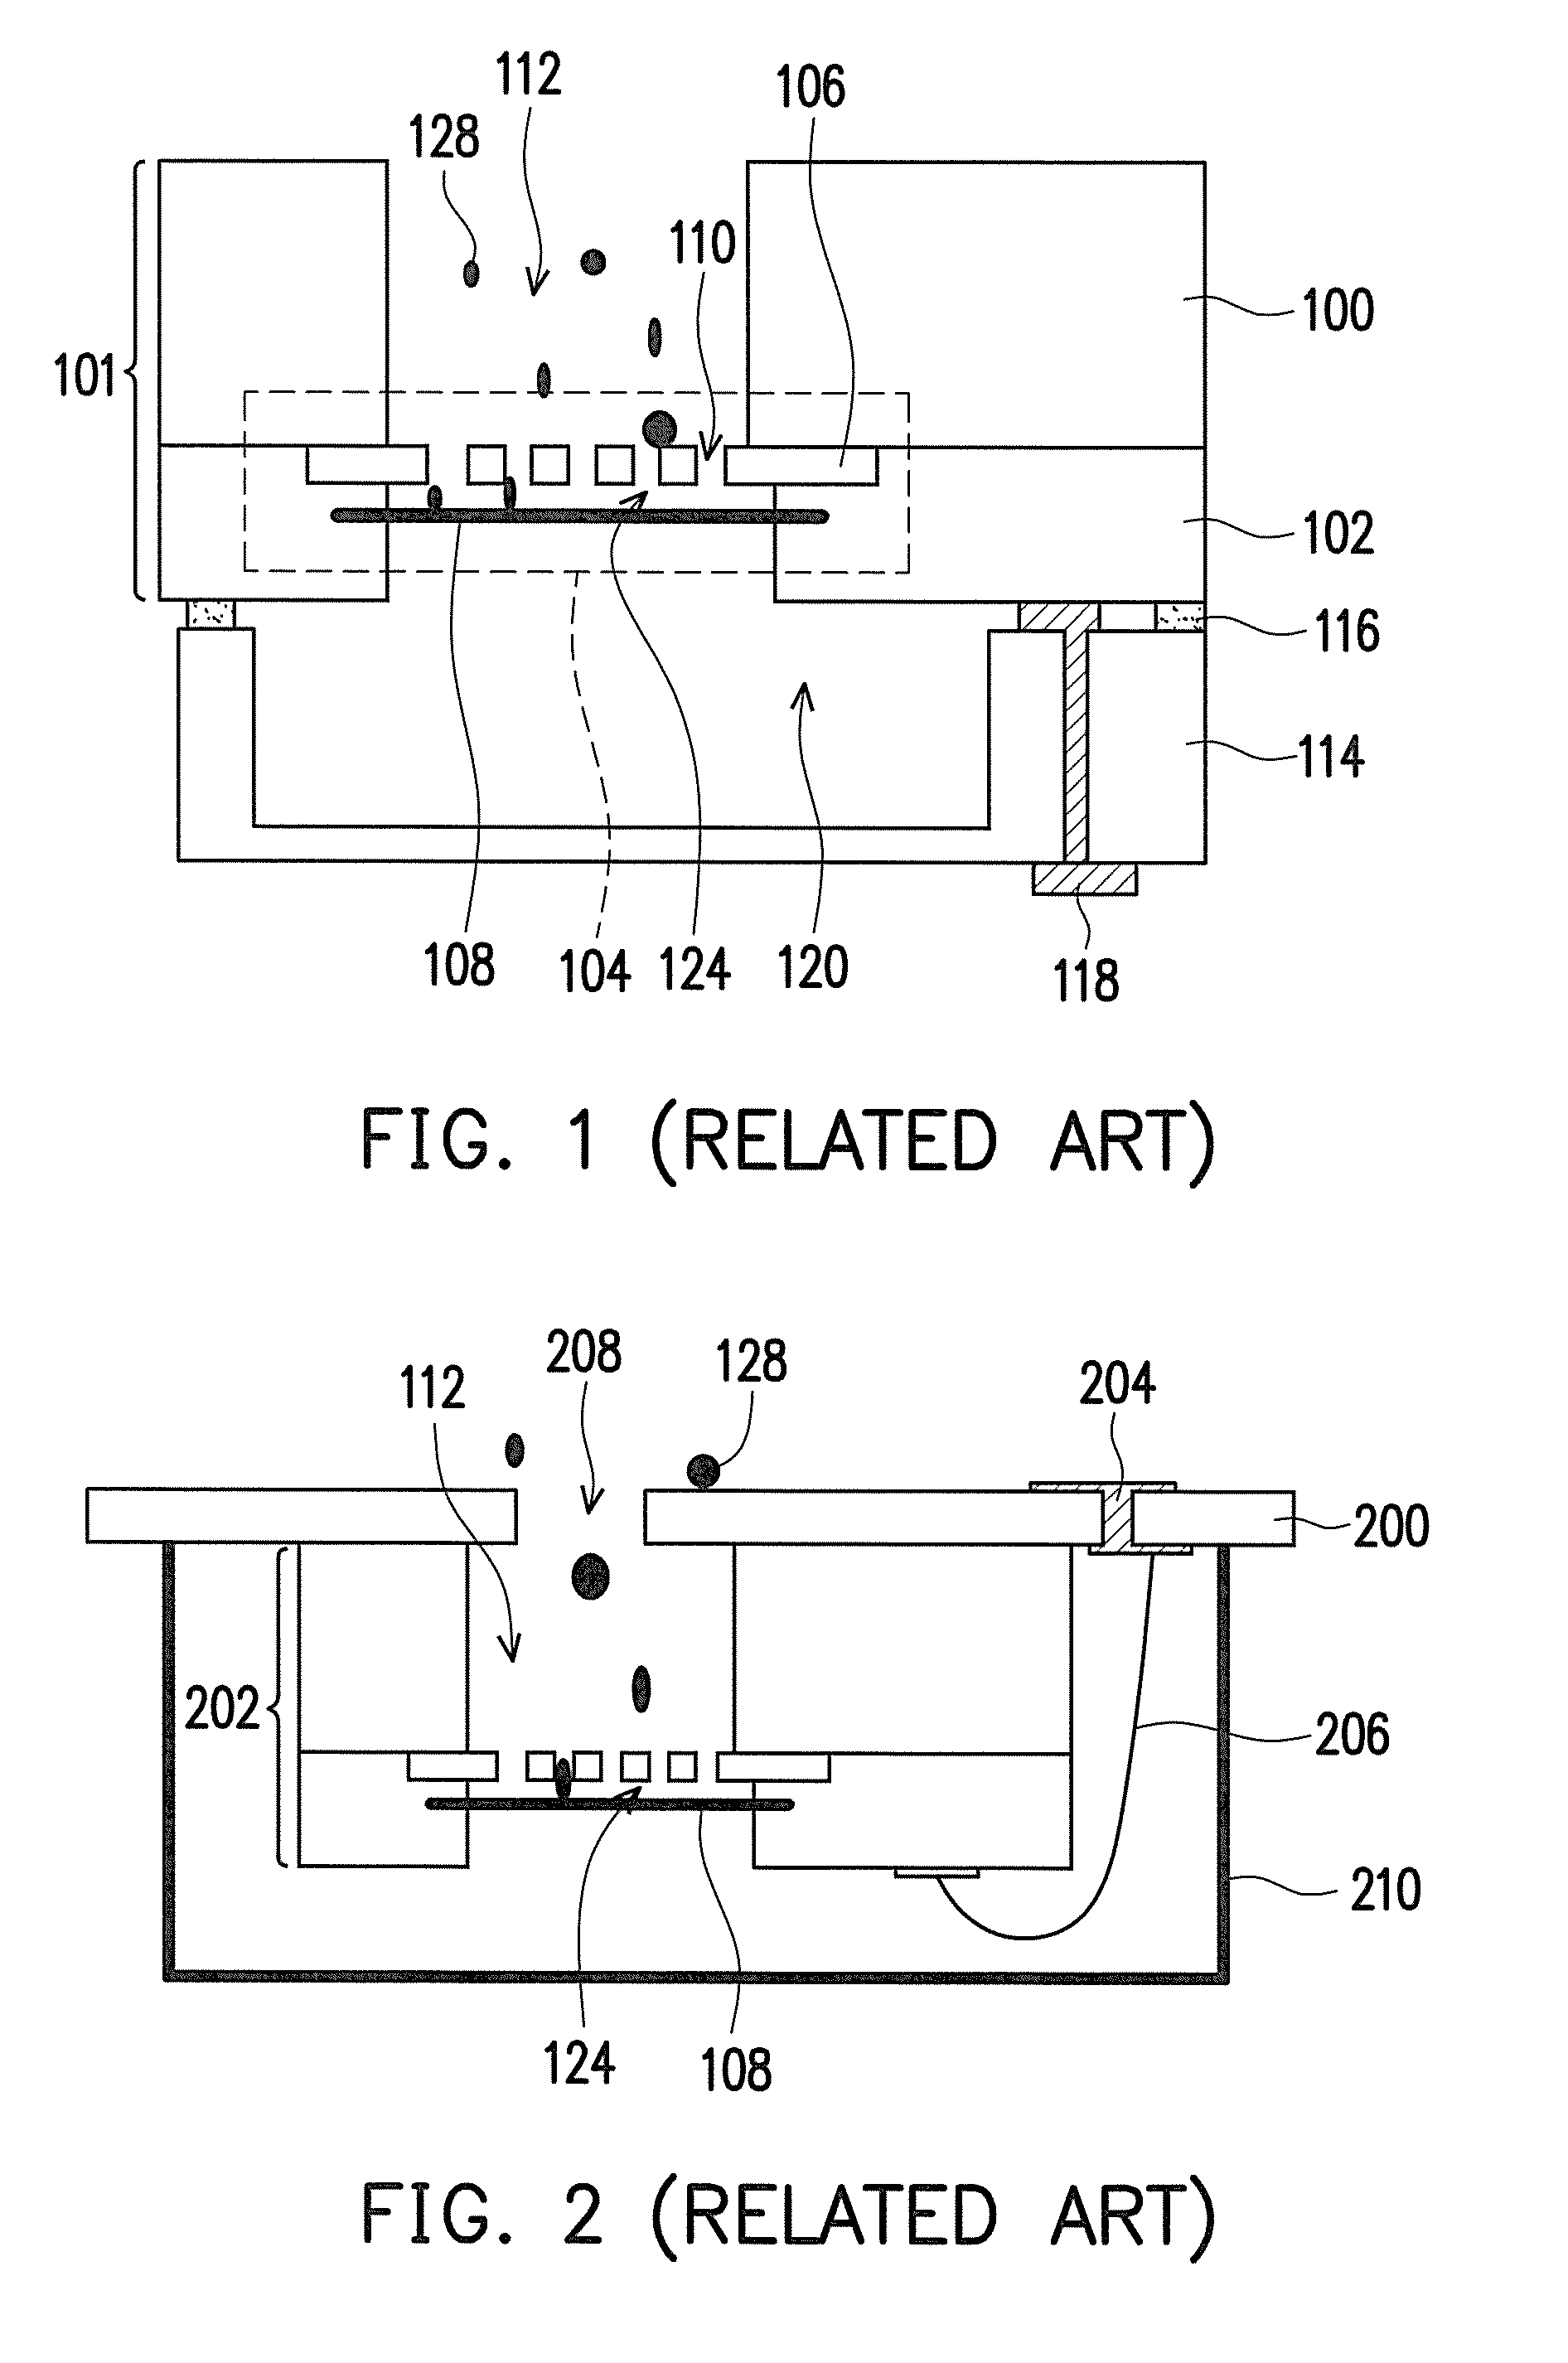 Micro-electrical-mechanical system (MEMS) microphone